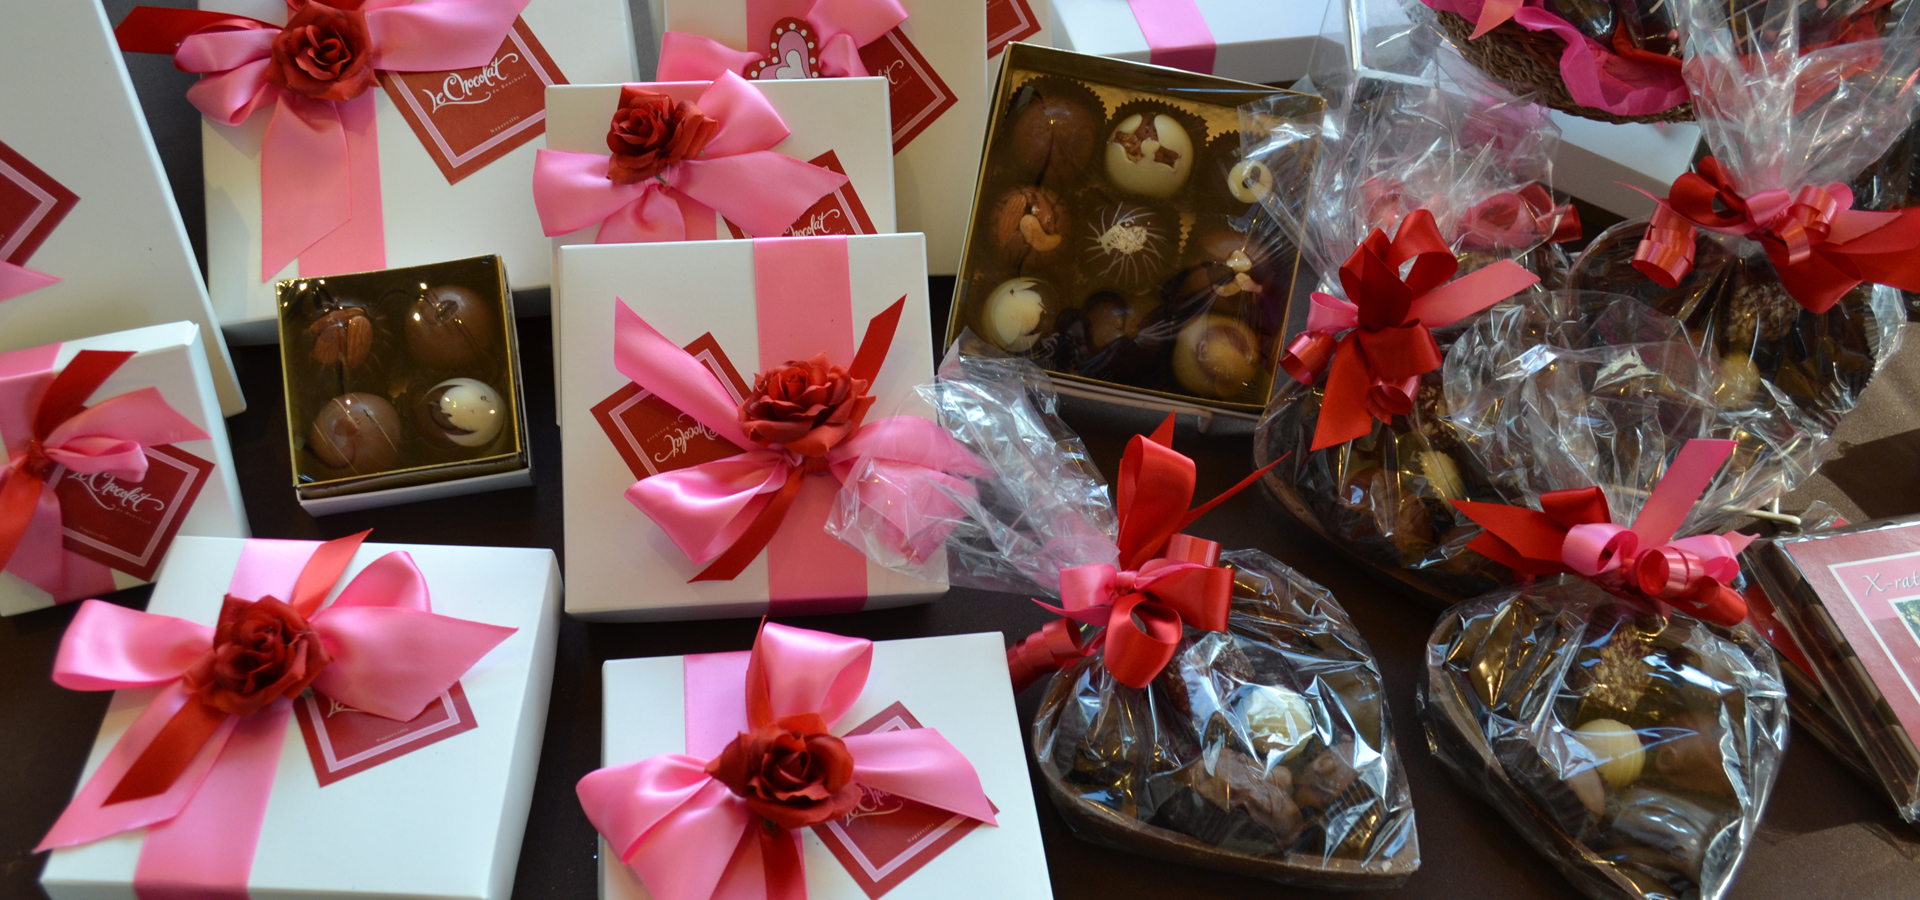 Arrangement of chocolates and candies with decorative packaging and ribbons